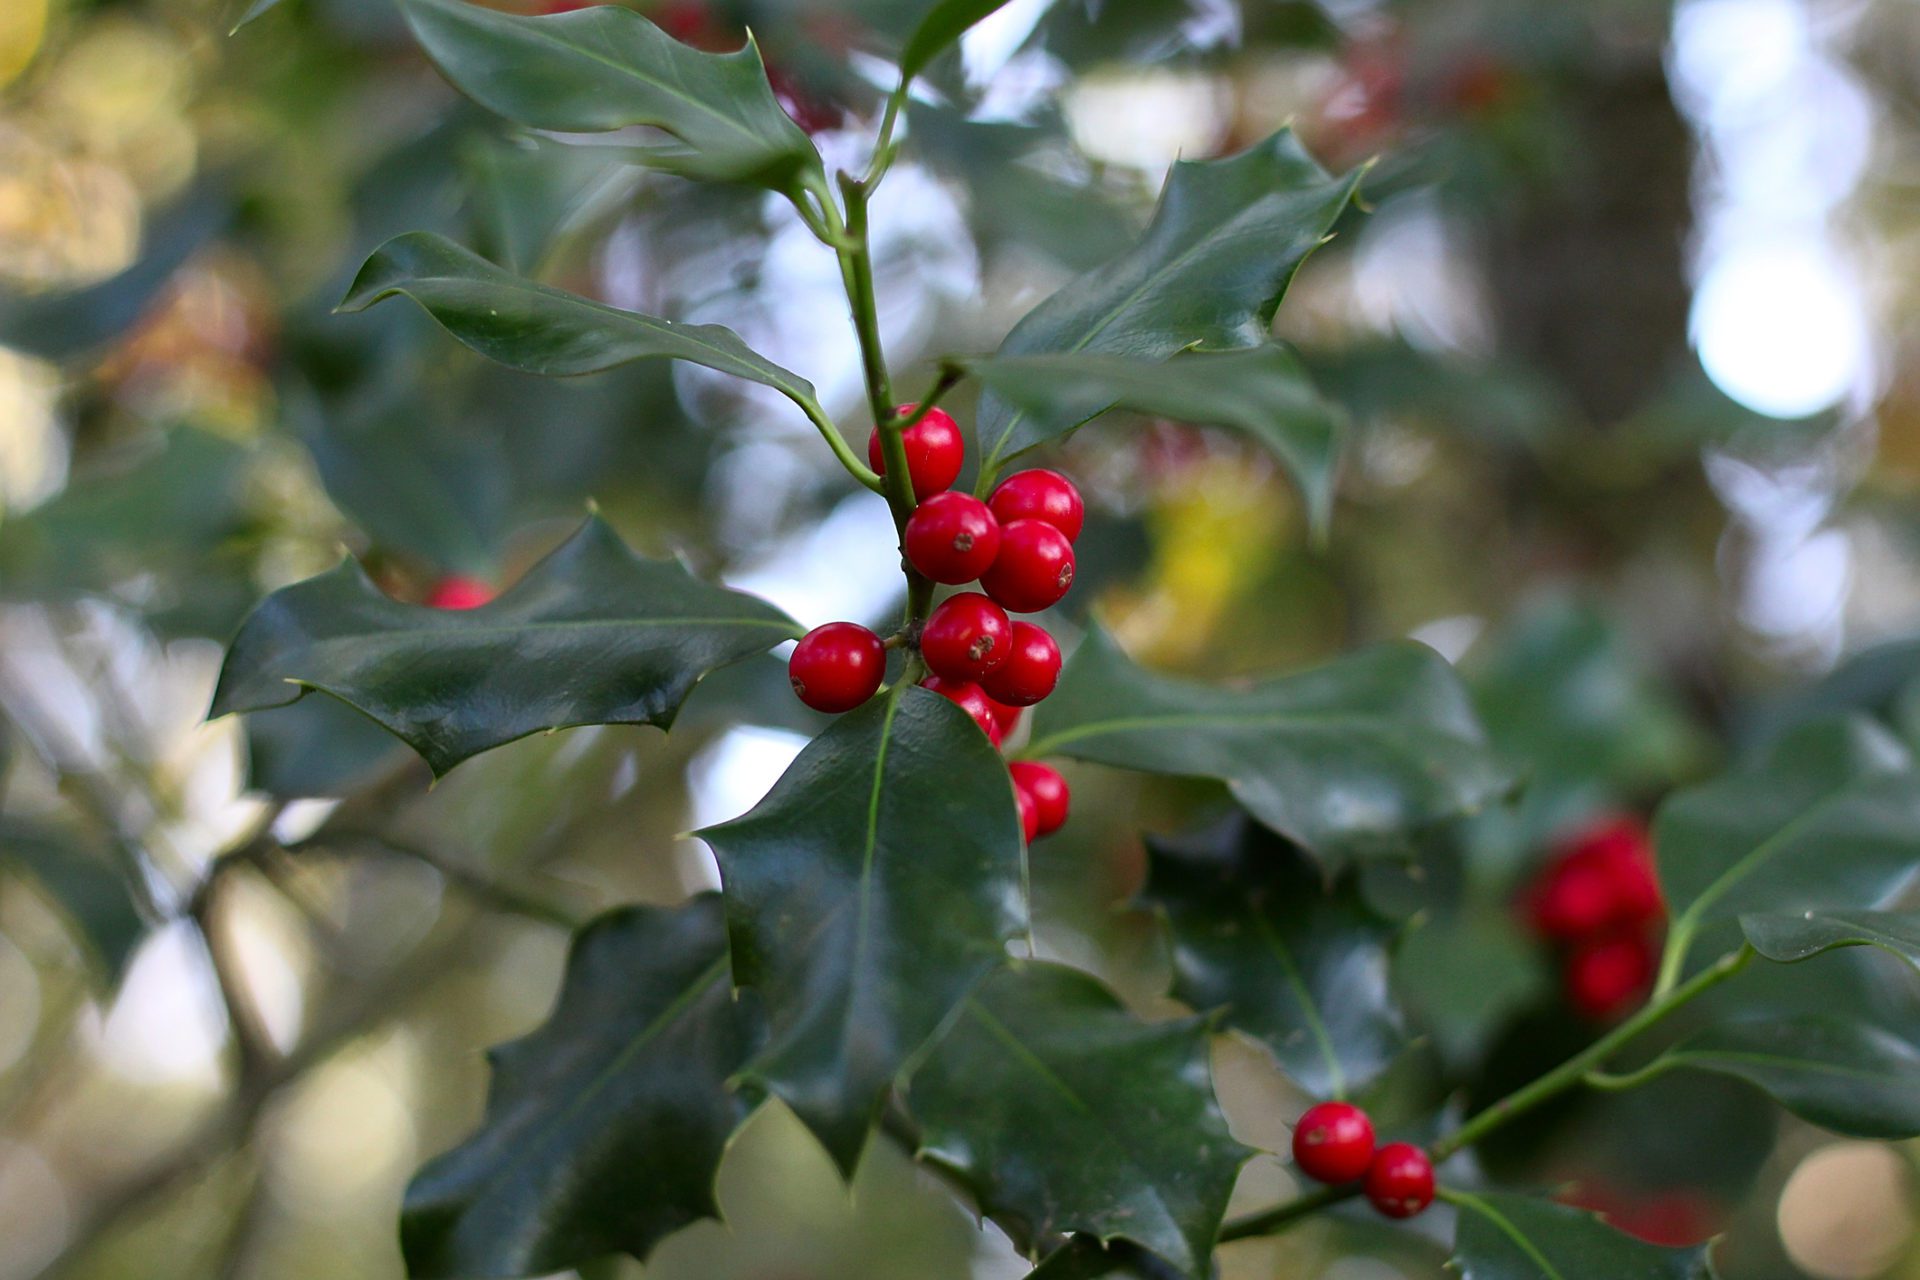 Winterberry Holly is a cold hardy shrub that adds color during winter.